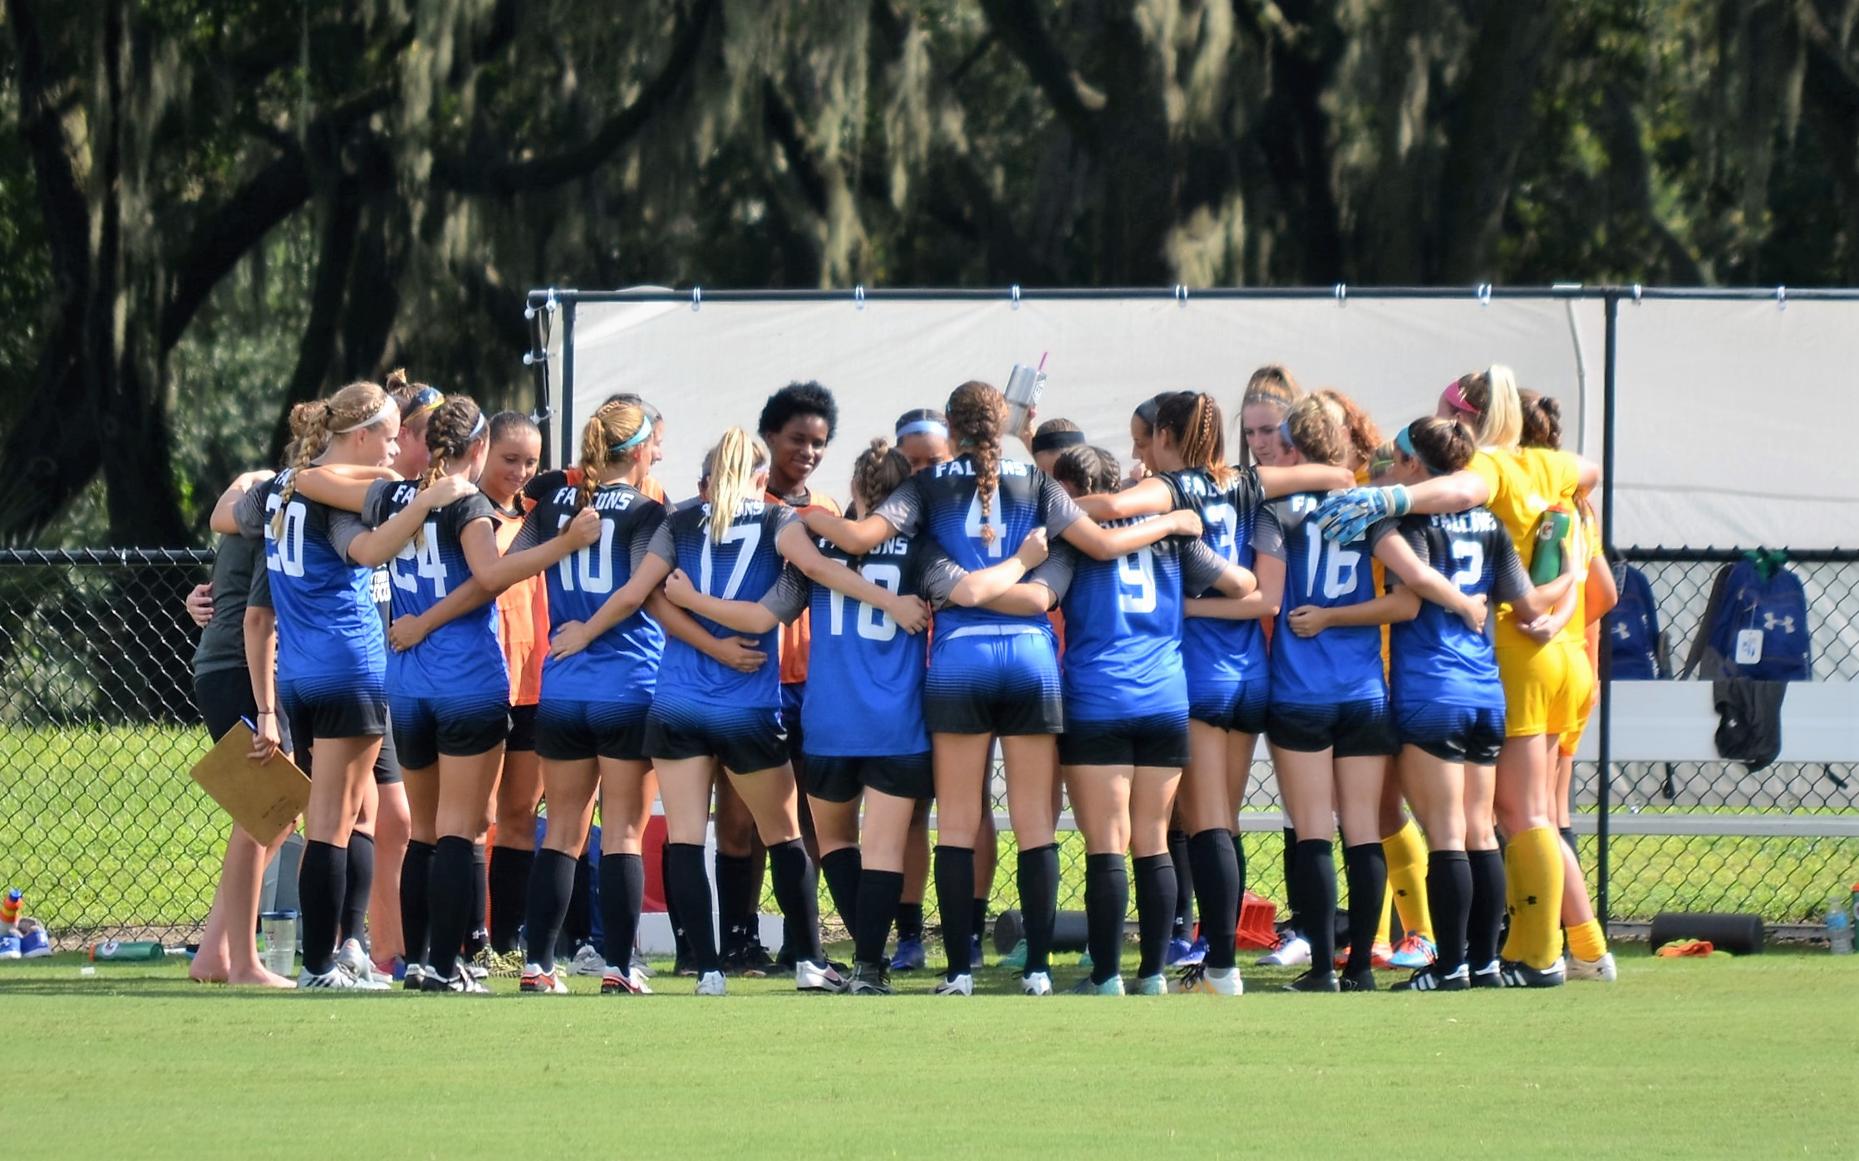 Continued Successes Move Falcons Higher in National Polls